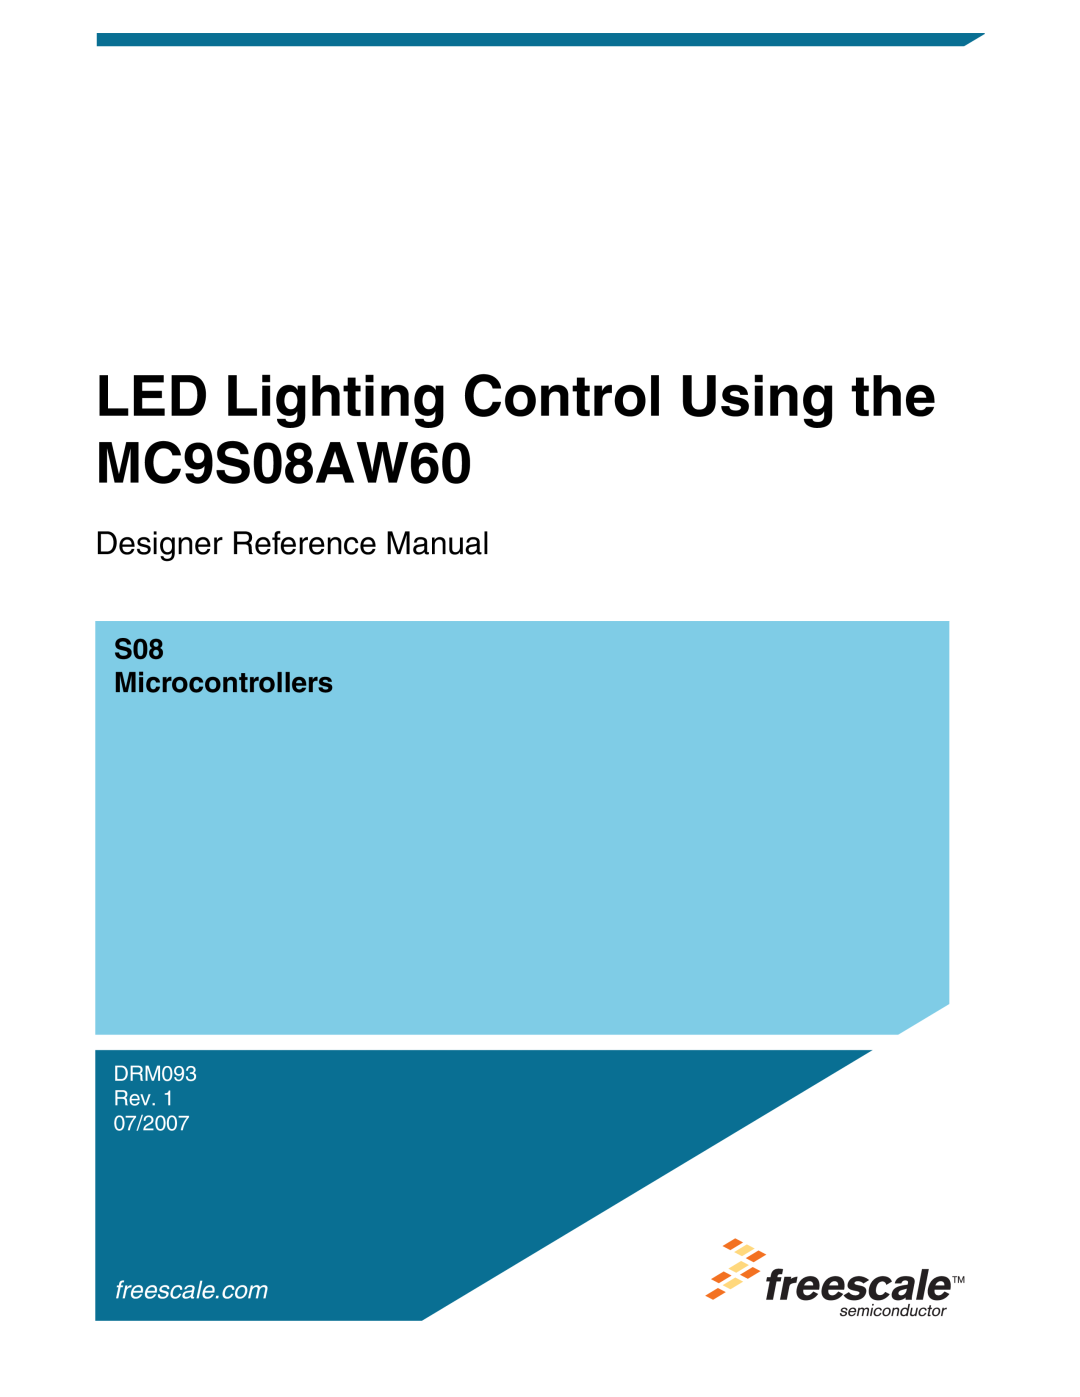 Freescale Semiconductor manual LED Lighting Control Using the MC9S08AW60, Designer Reference Manual, freescale.com 